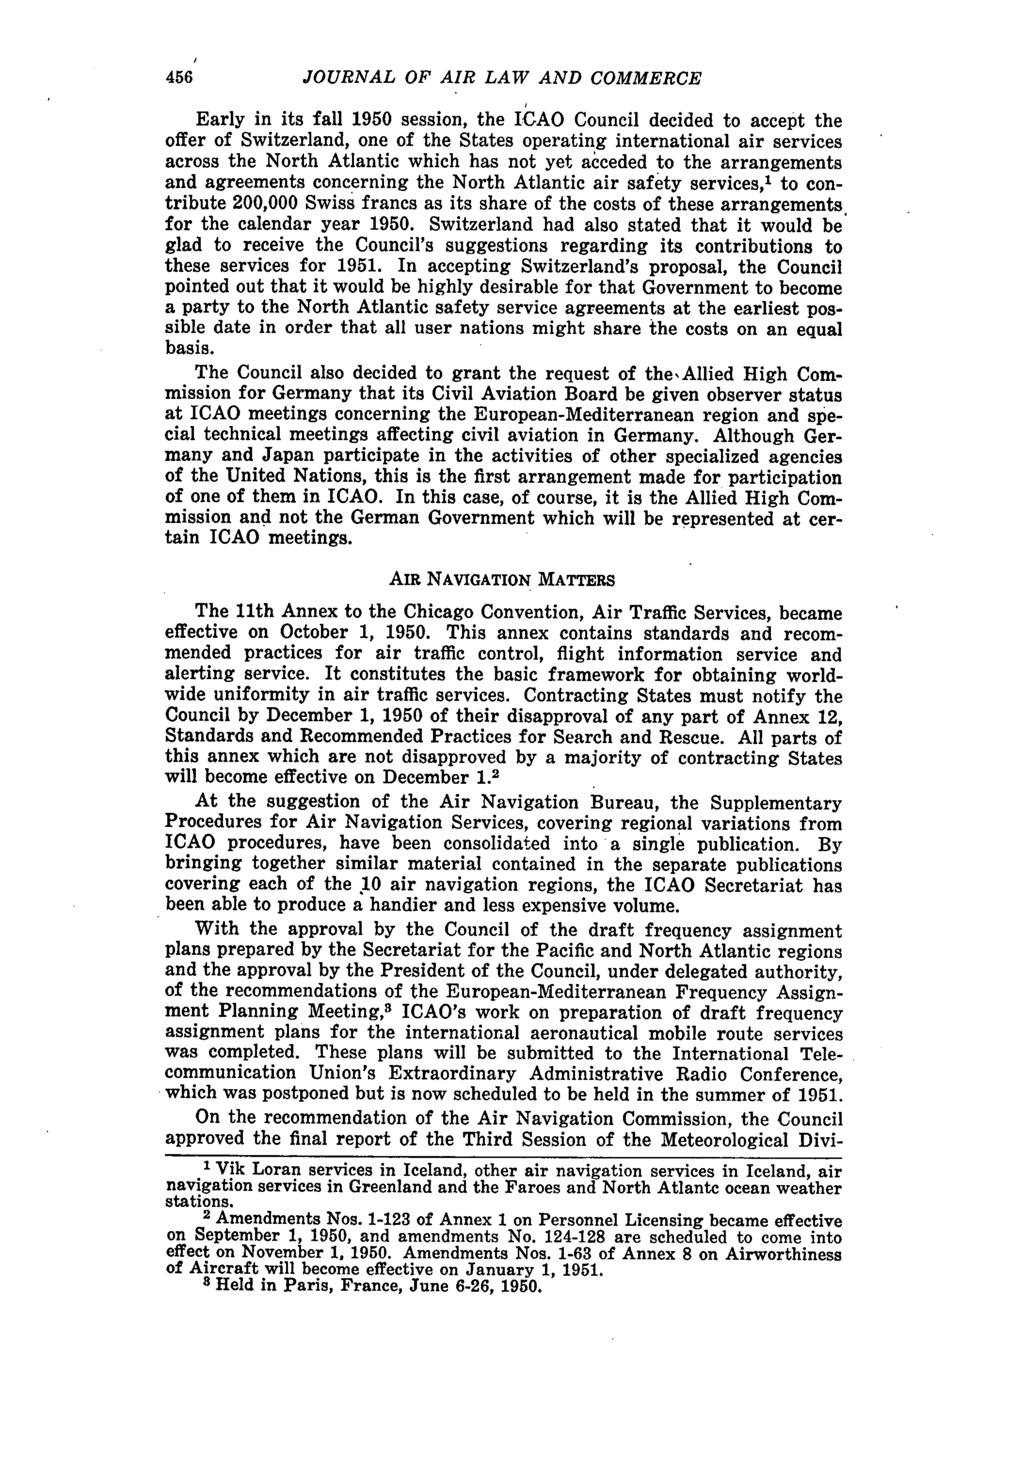 456 JOURNAL OF AIR LAW AND COMMERCE Early in its fall 1950 session, the ICAO Council decided to accept the offer of Switzerland, one of the States operating international air services across the